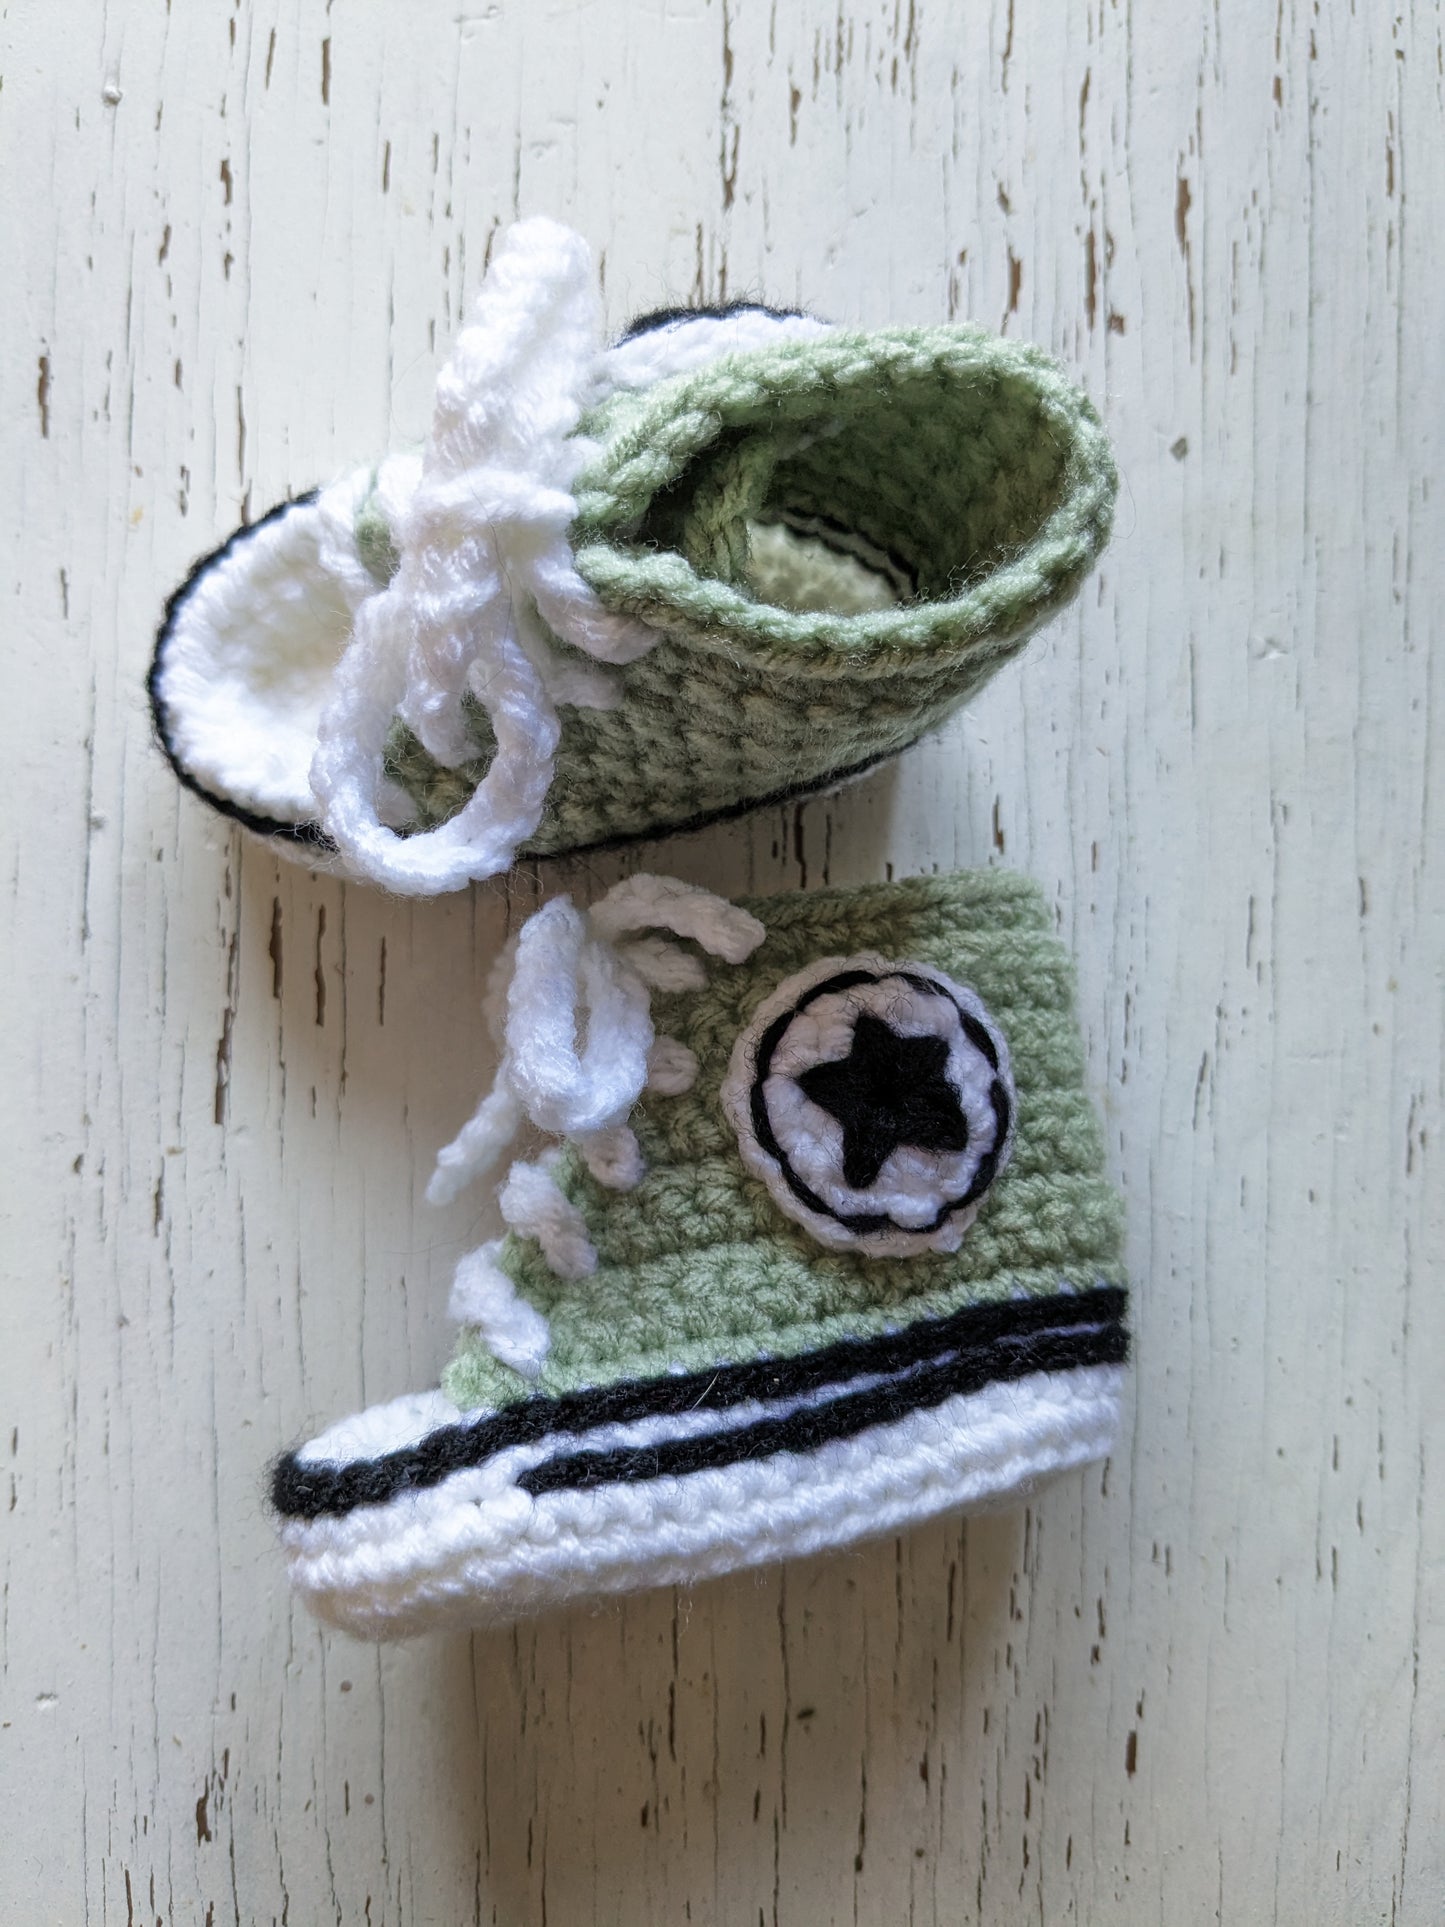 Baby Converse Booties